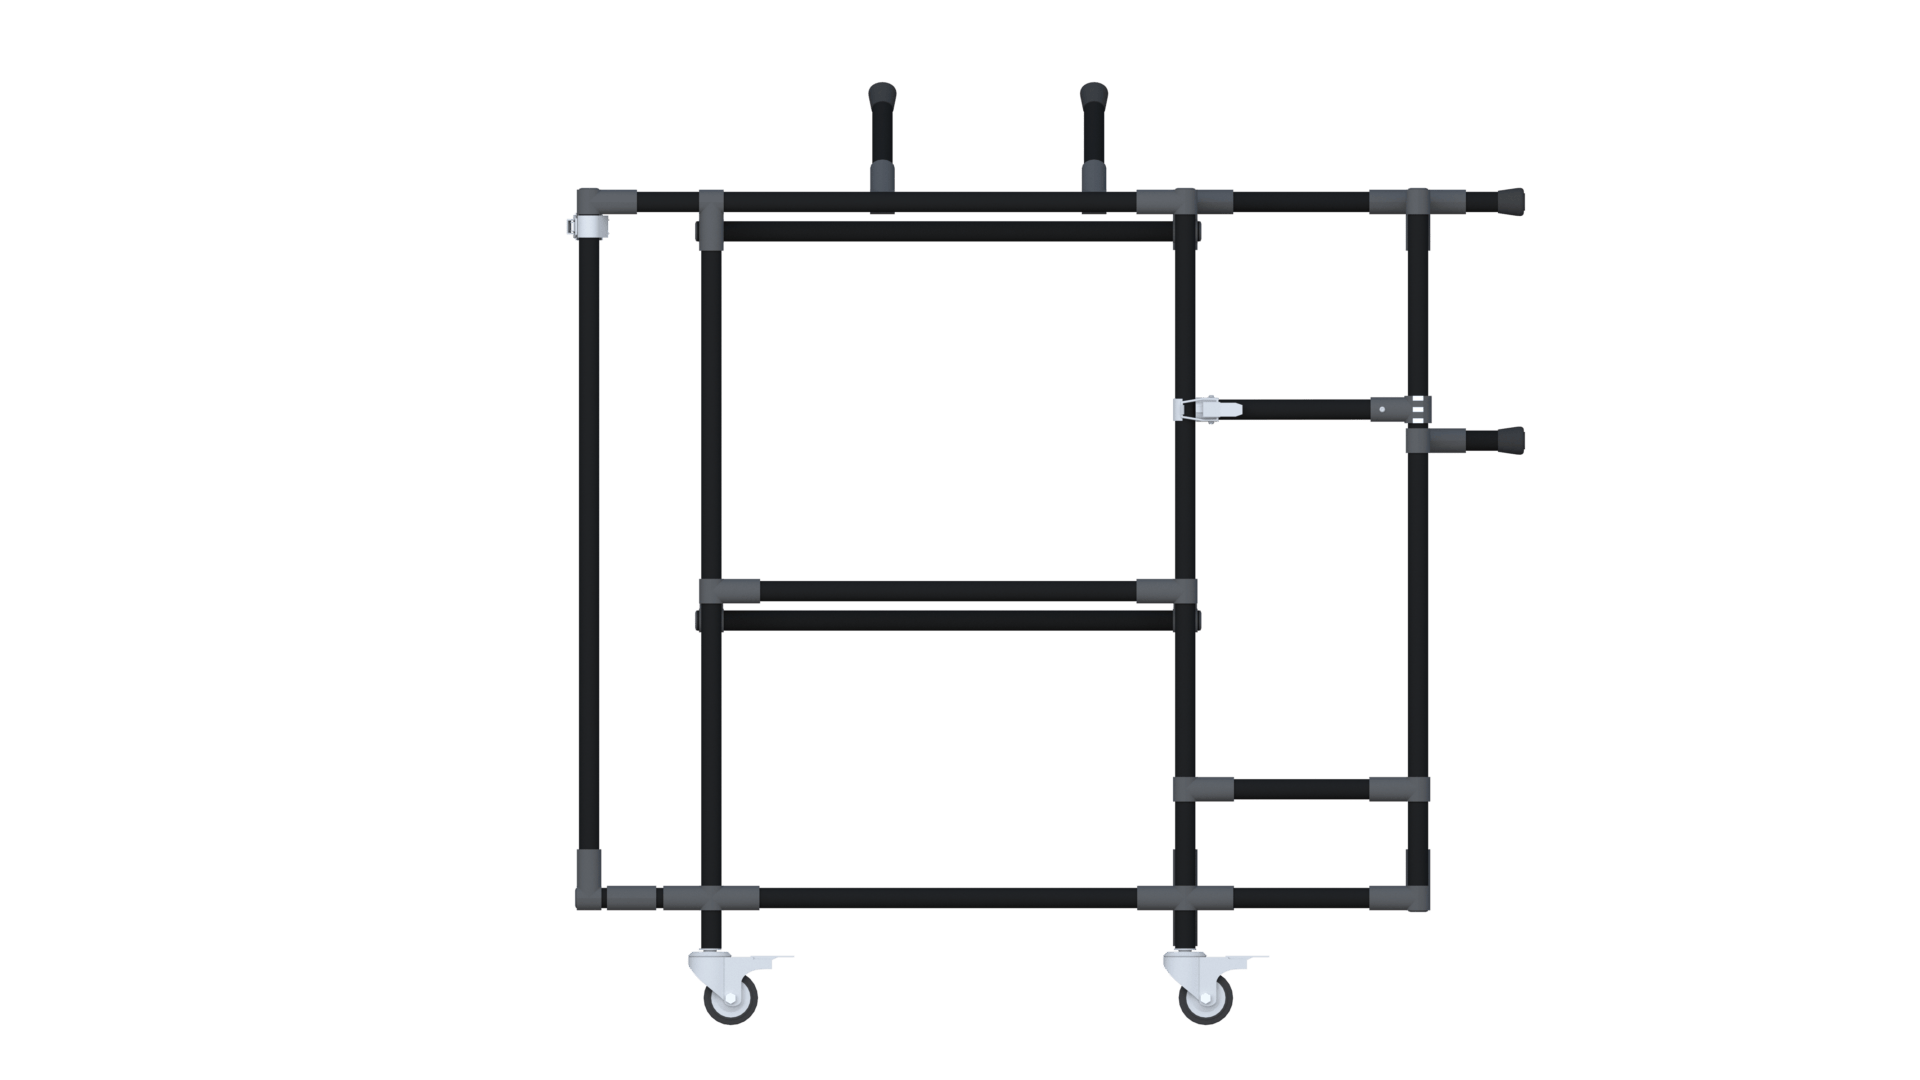 Sports equipment storage rack: Free plans to build your own.